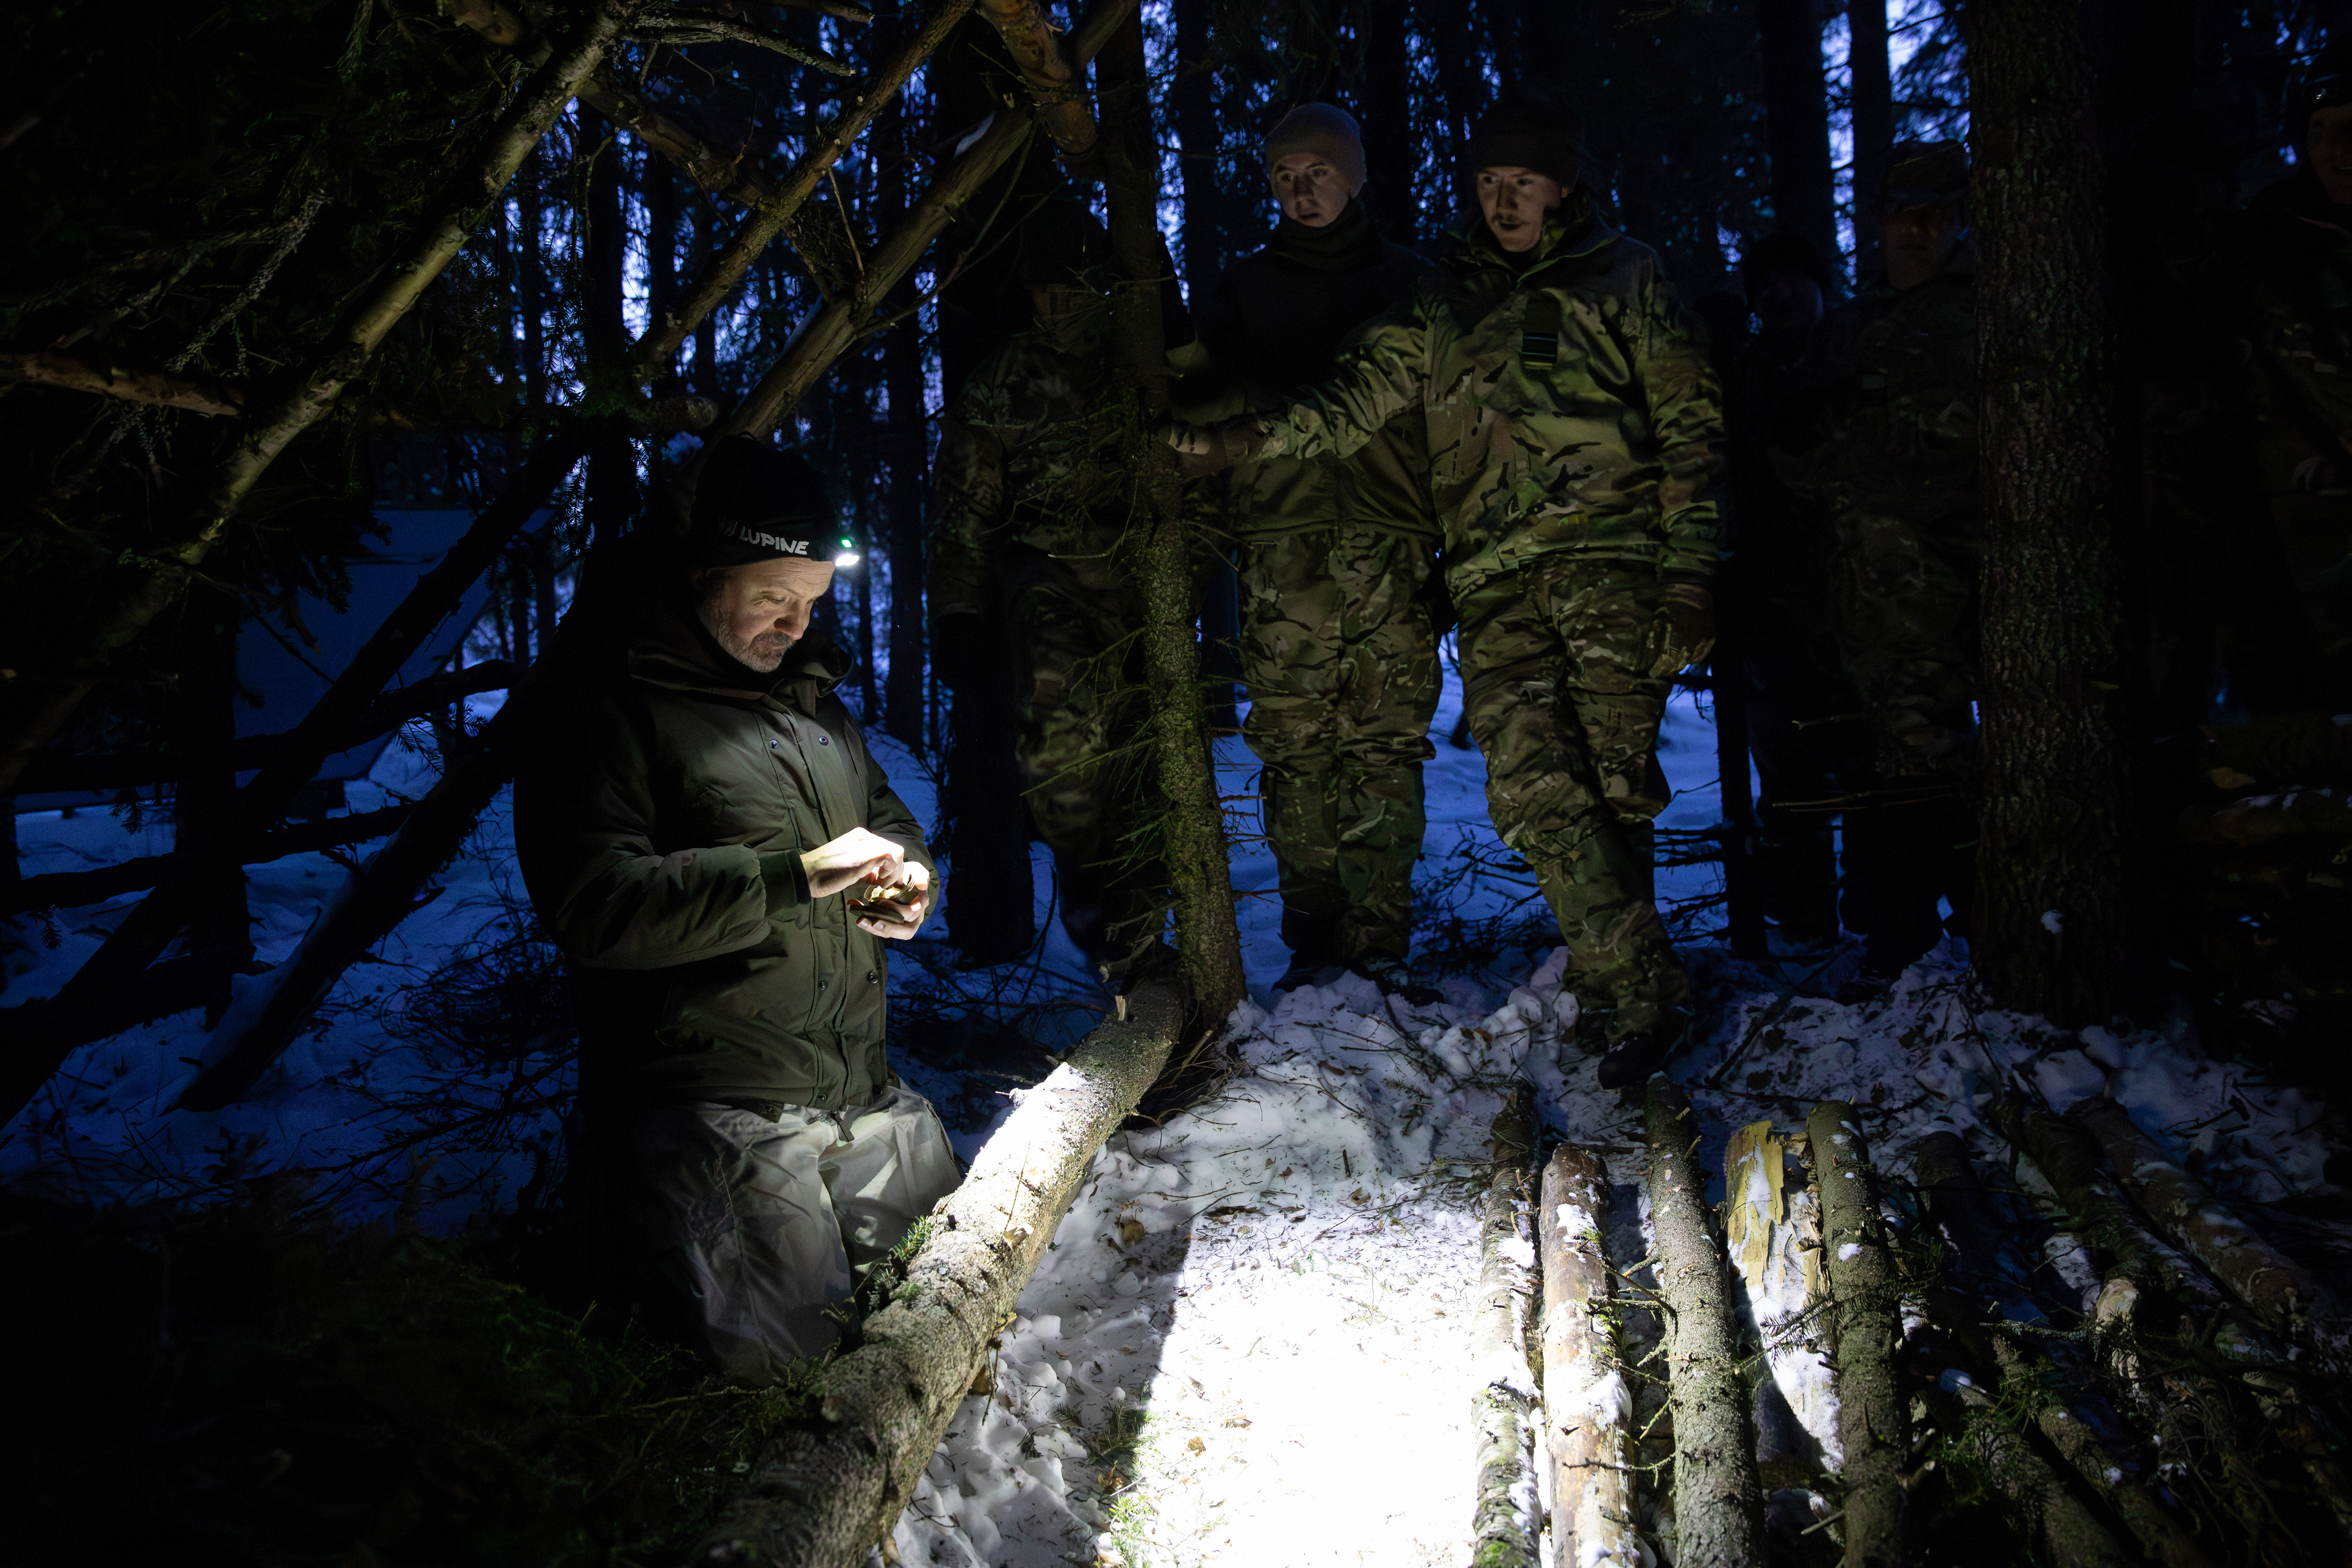 RAF personnel receiving instructions on lighting a fire in a shelter in a snow covered environment